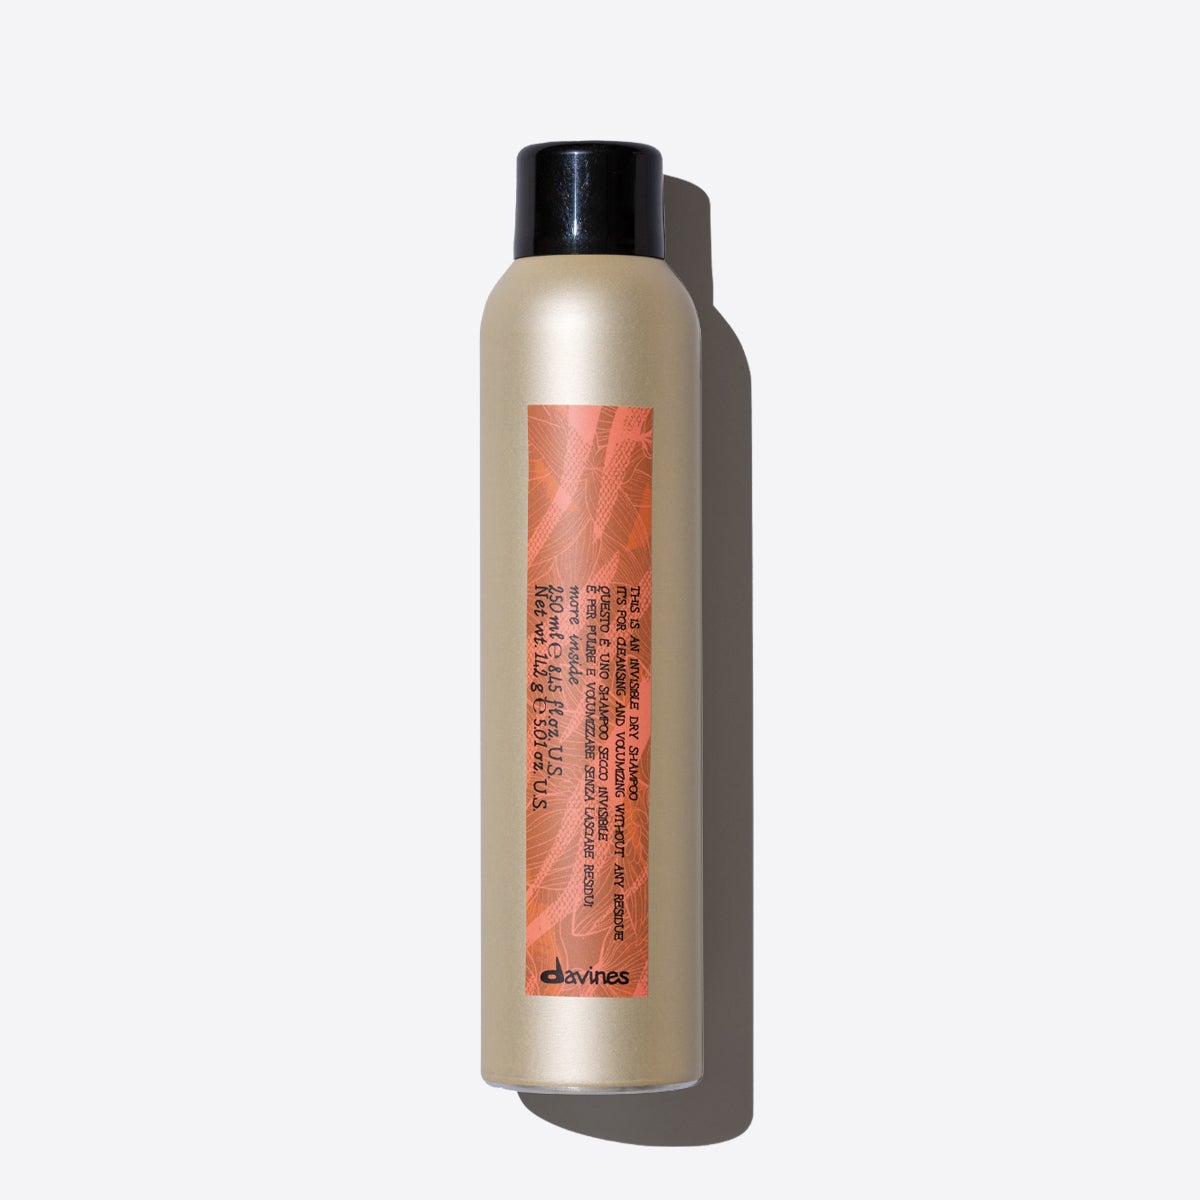 Suchy szampon This is an Invisible Dry Shampoo